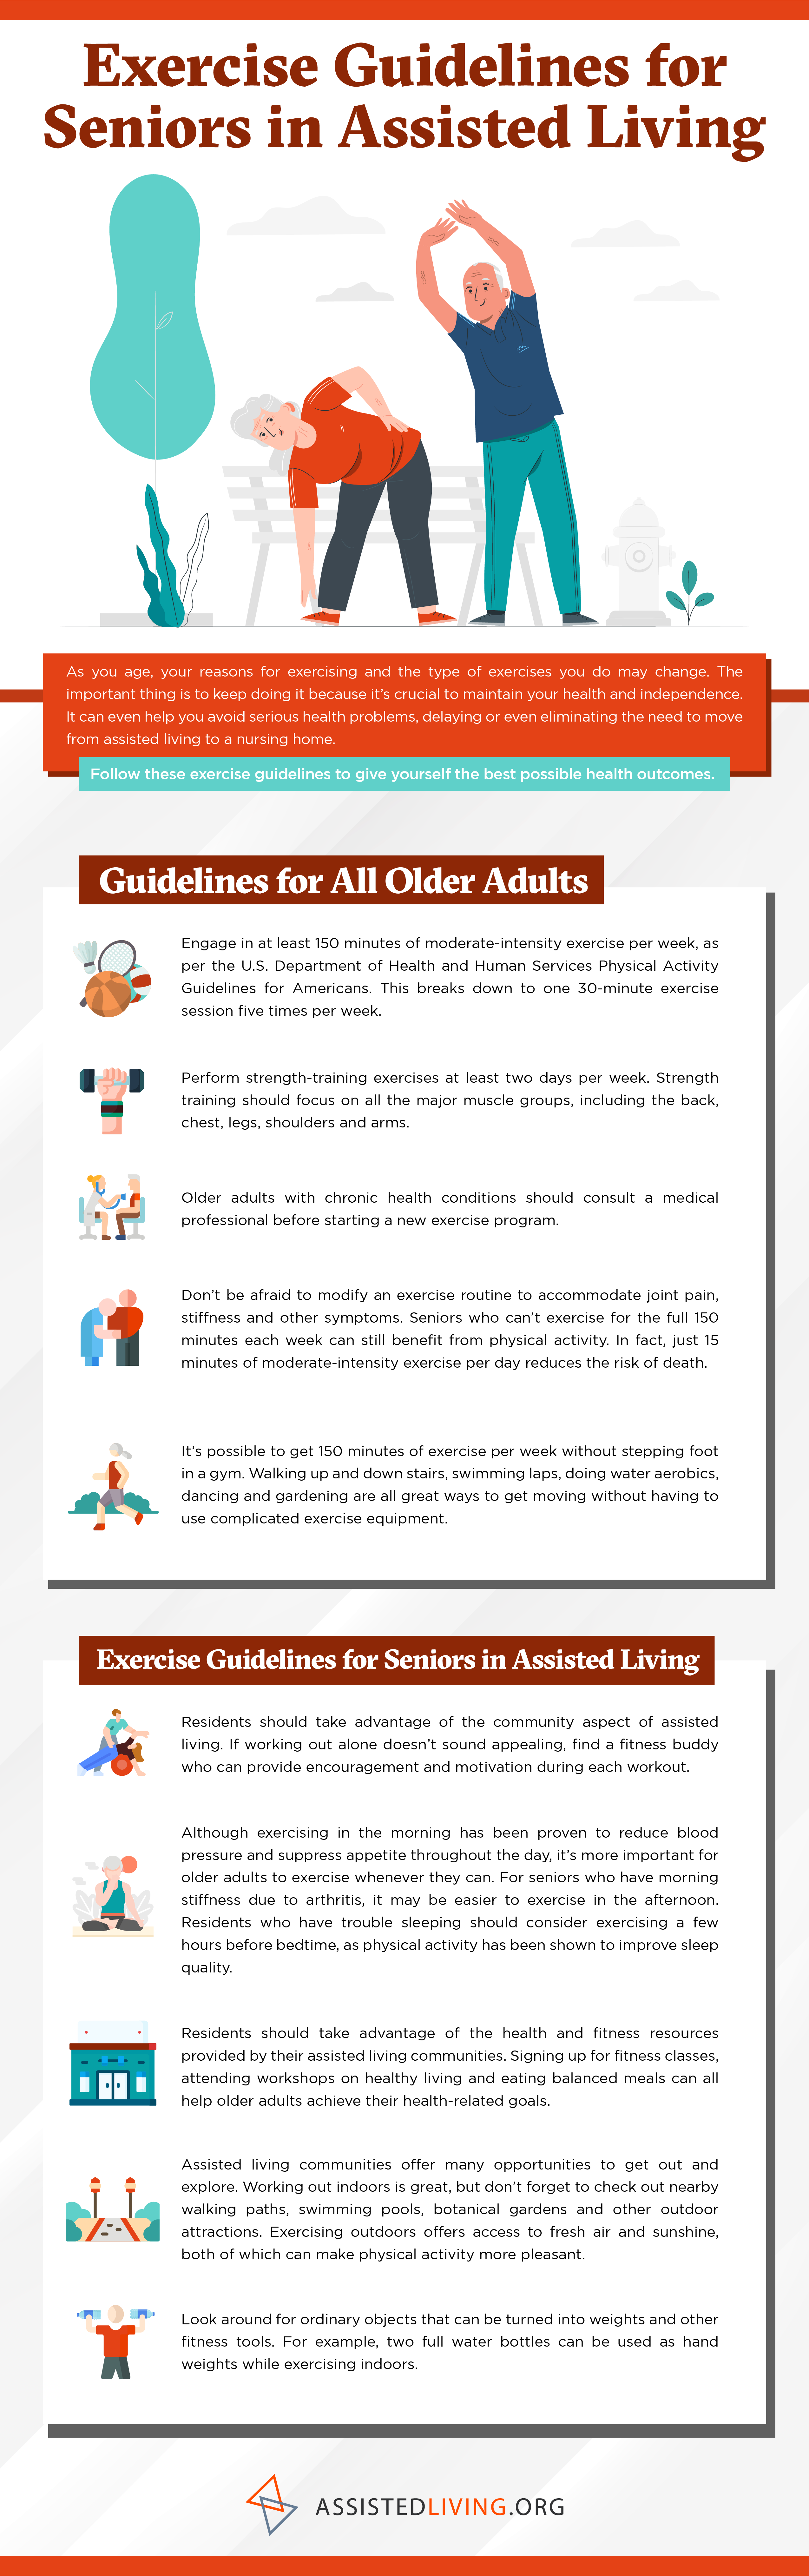 Exercise Guide for Seniors in Assisted Living Communities